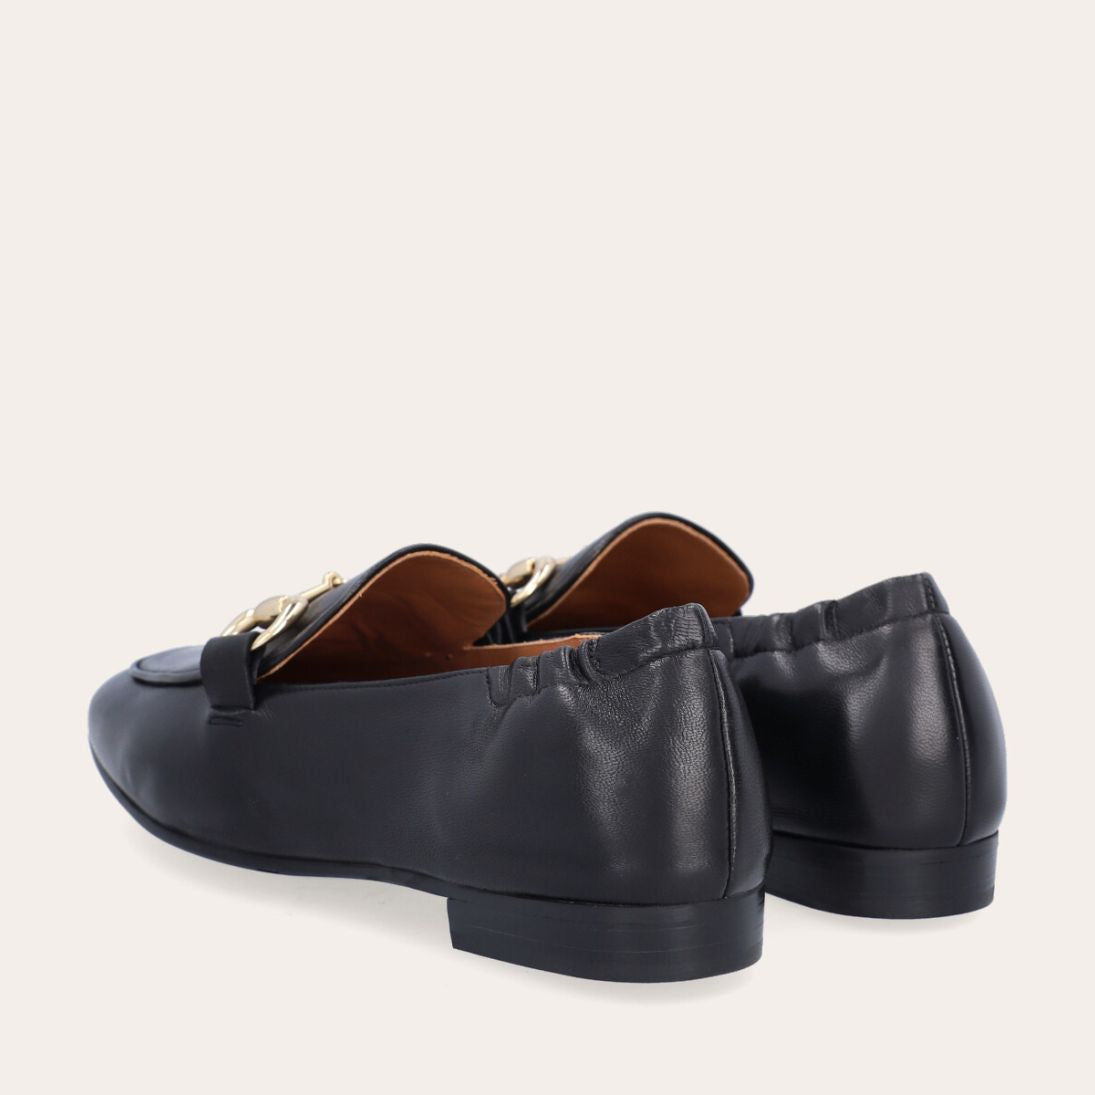 Classic Loafer in Nappa Leather Black/Gold